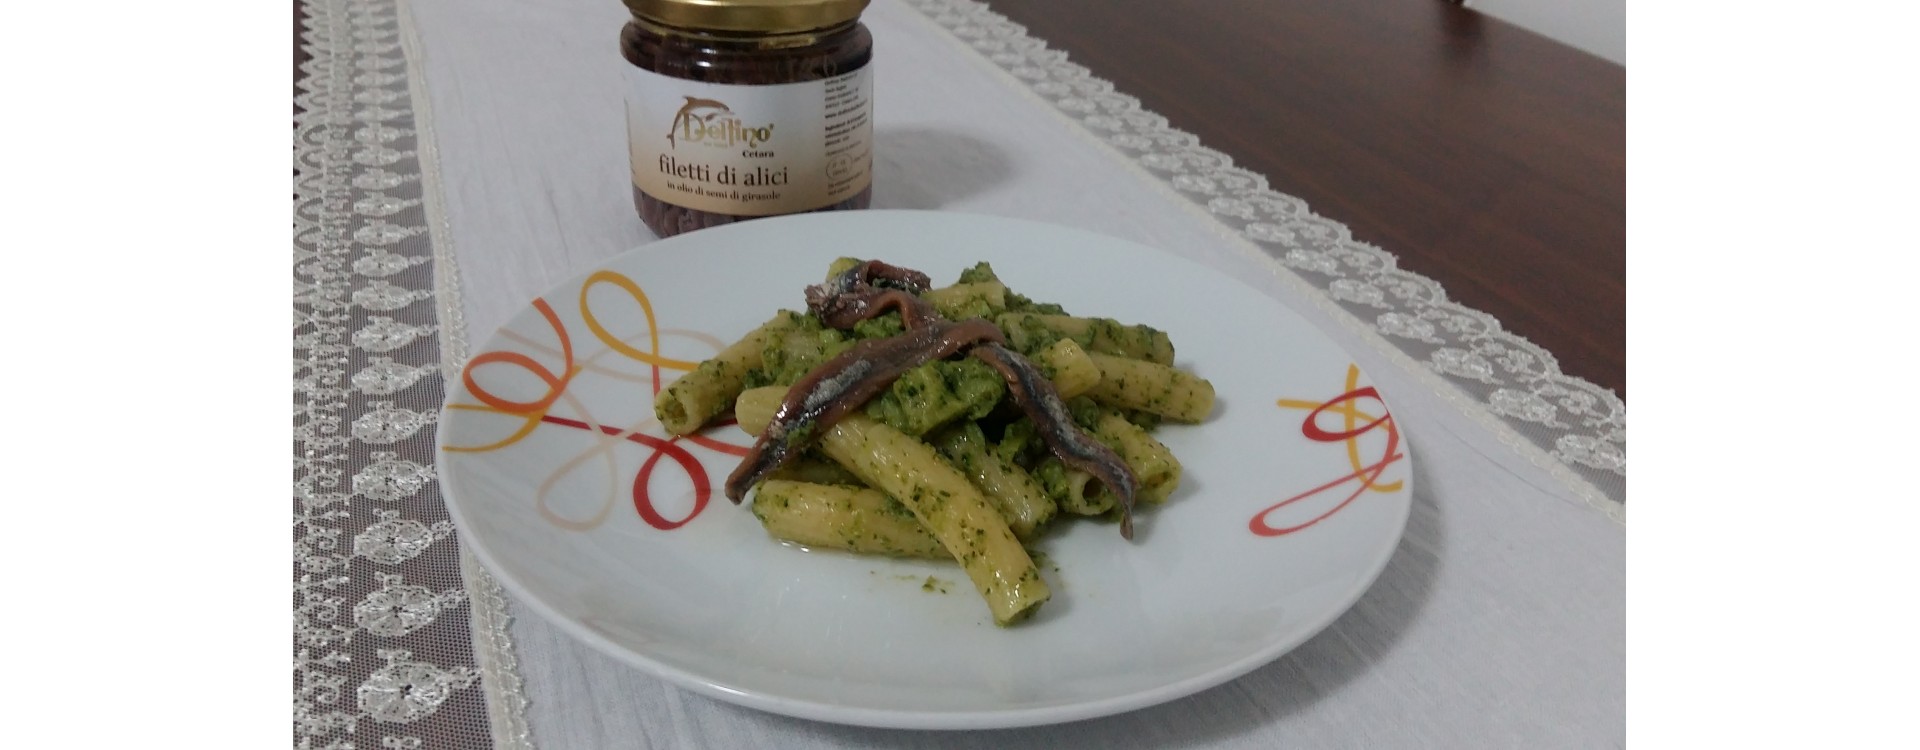 Pasta with broccoli and anchovies in oil